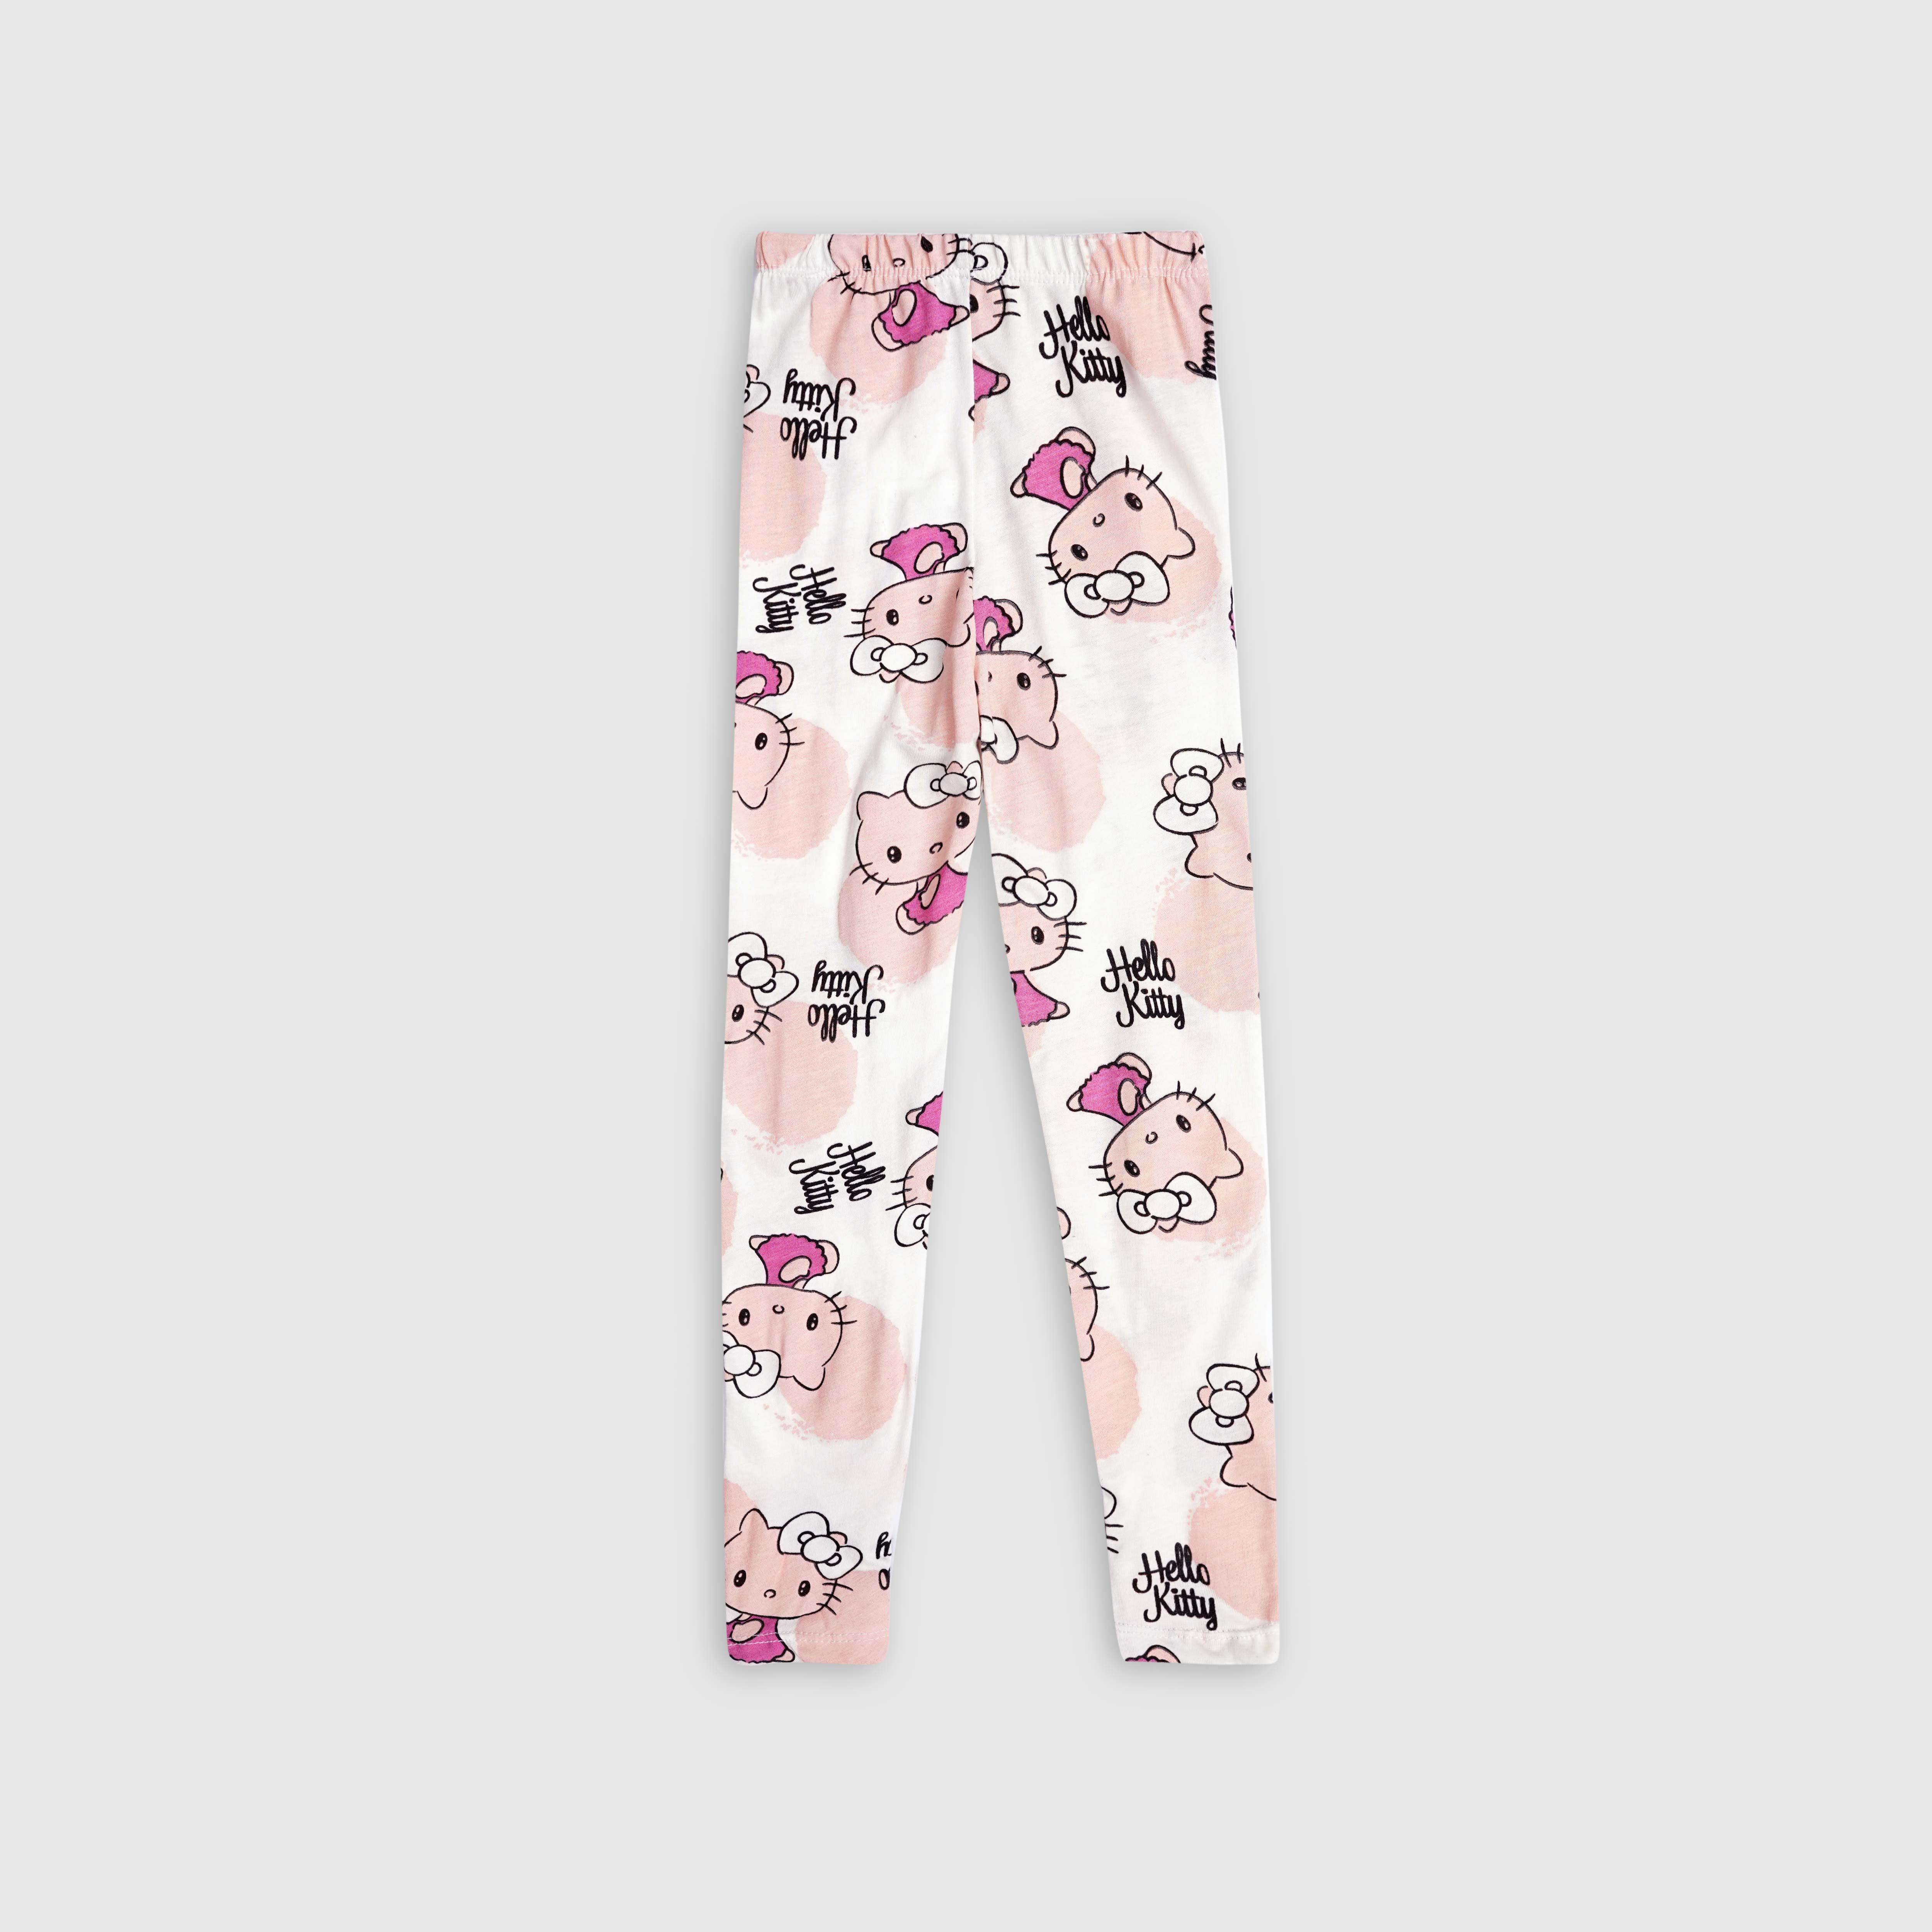 All-Over Printed Cotton Leggings